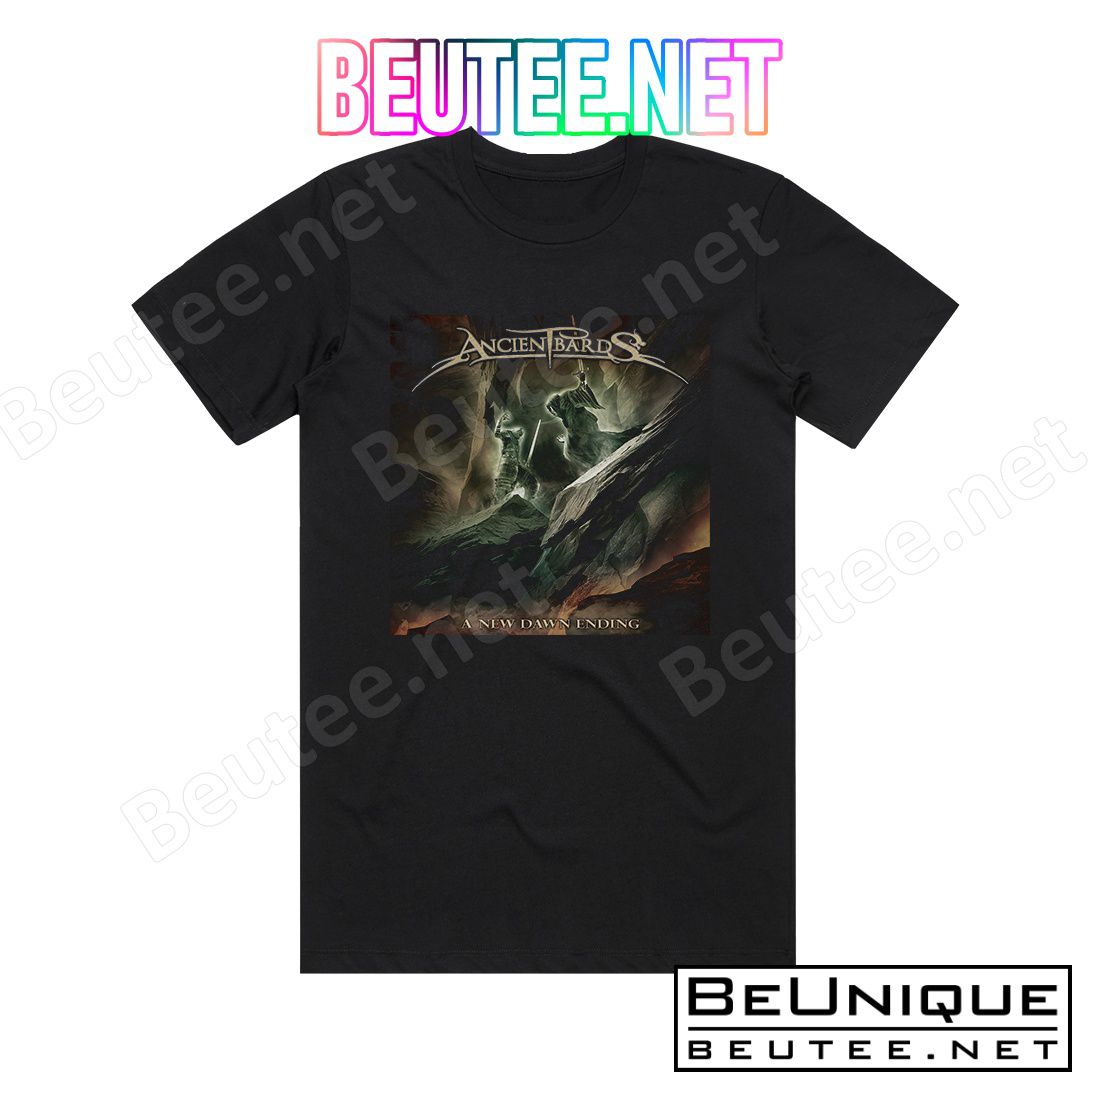 Ancient Bards A New Dawn Ending Album Cover T-Shirt